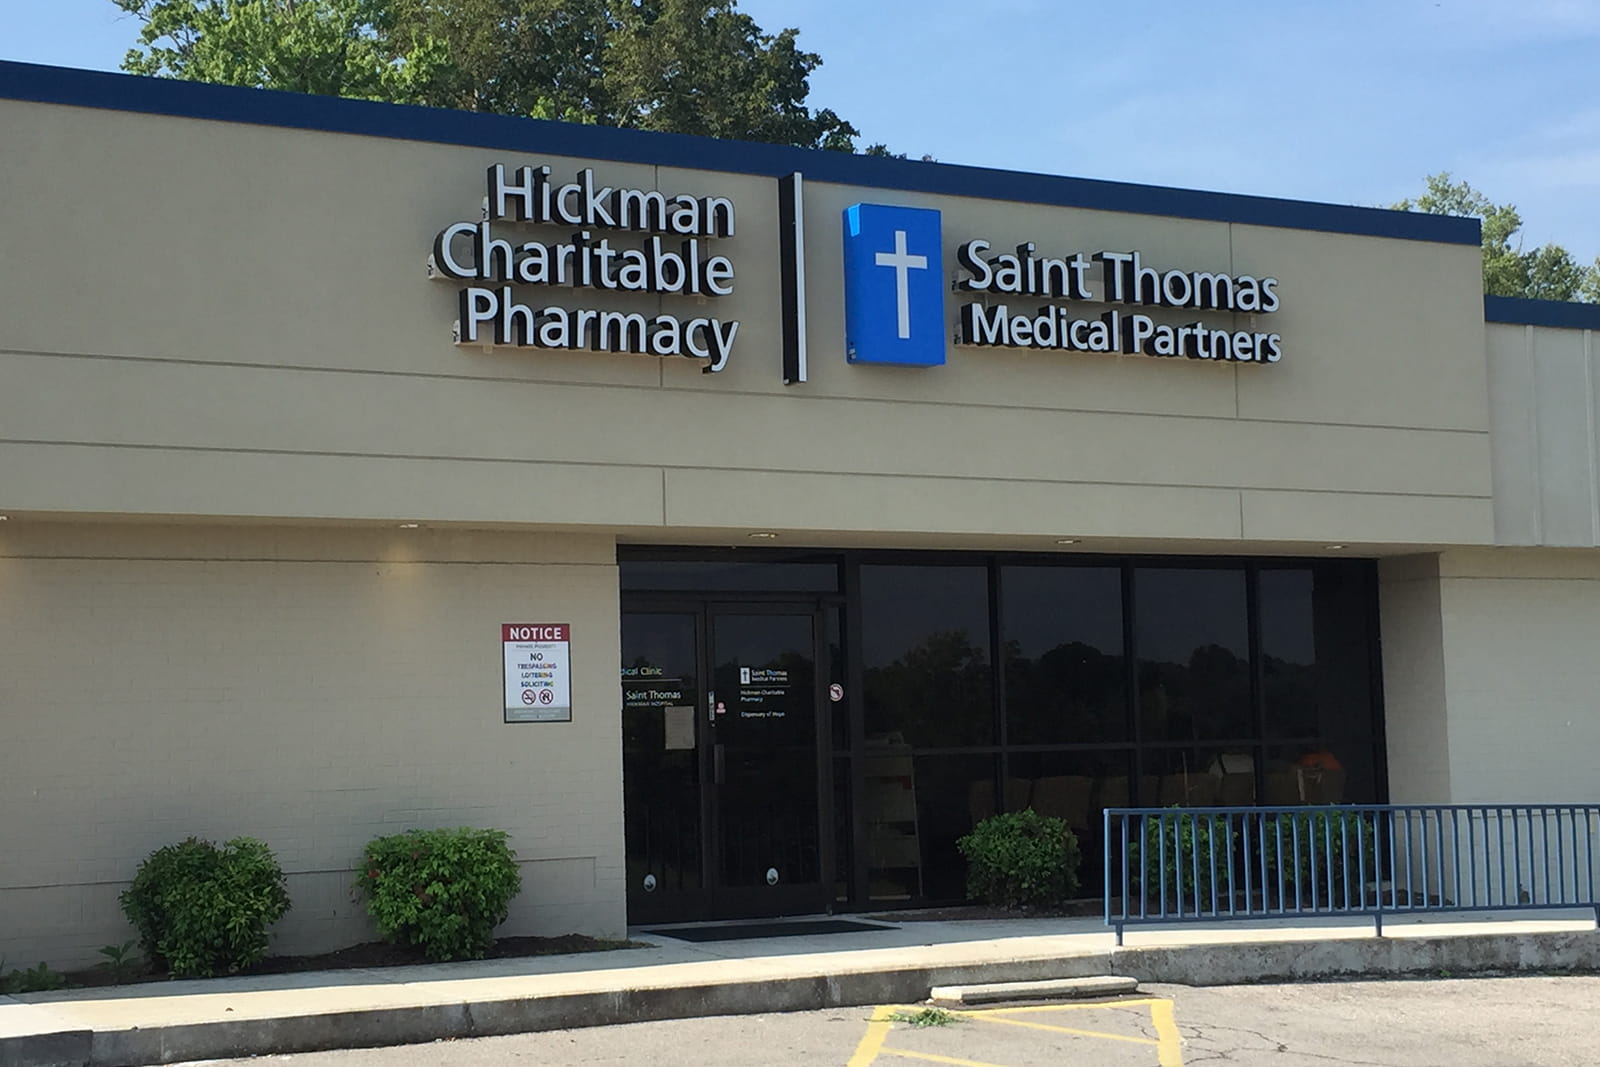 Ascension Saint Thomas Hickman Charitable Pharmacy in Centerville, Tennessee. 